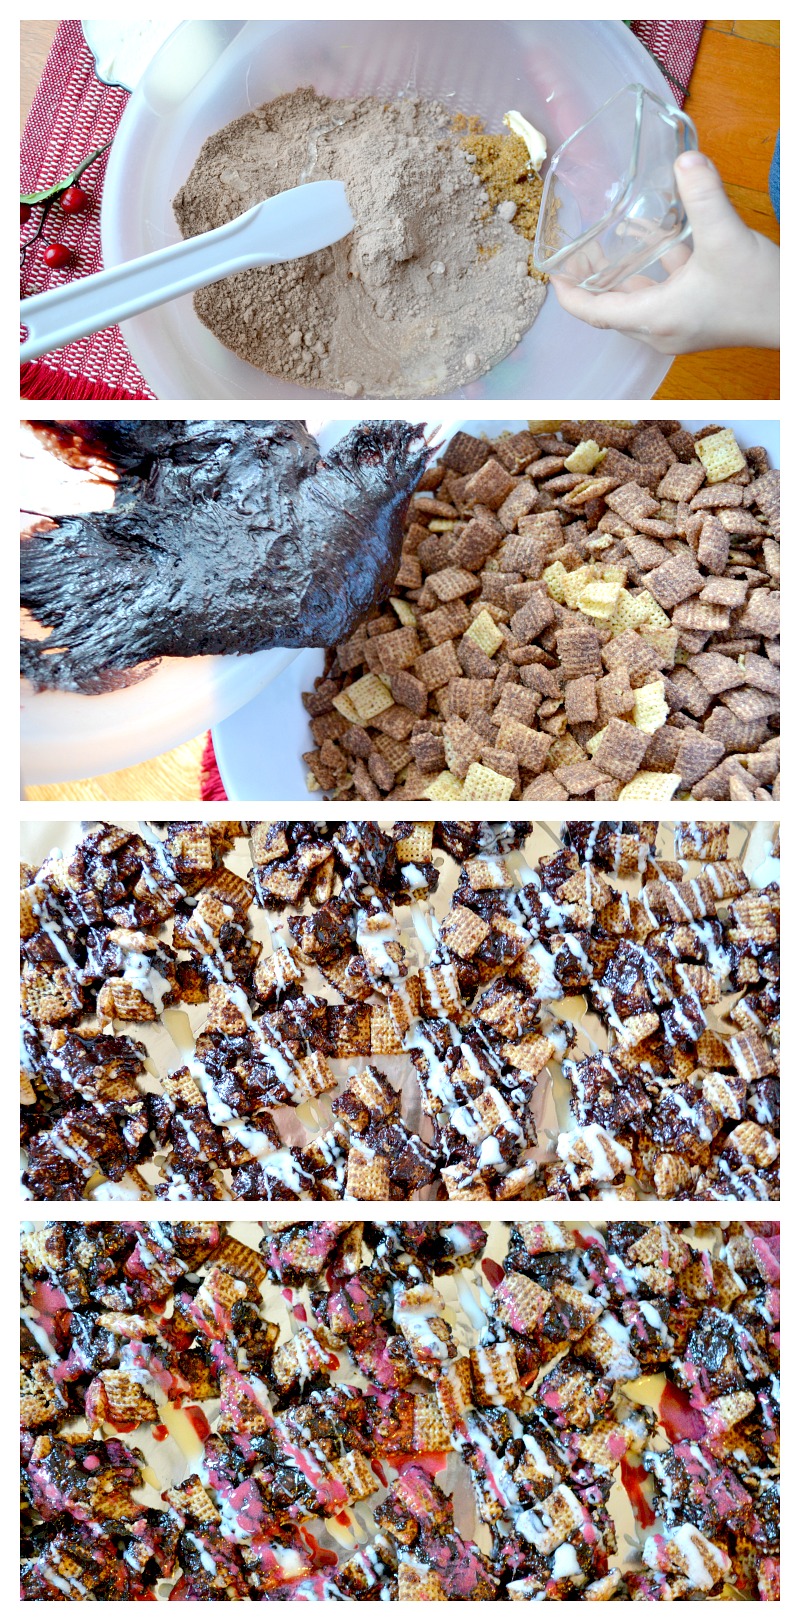 Easy Holiday Party Treat: Red Velvet Chex® Party Mix